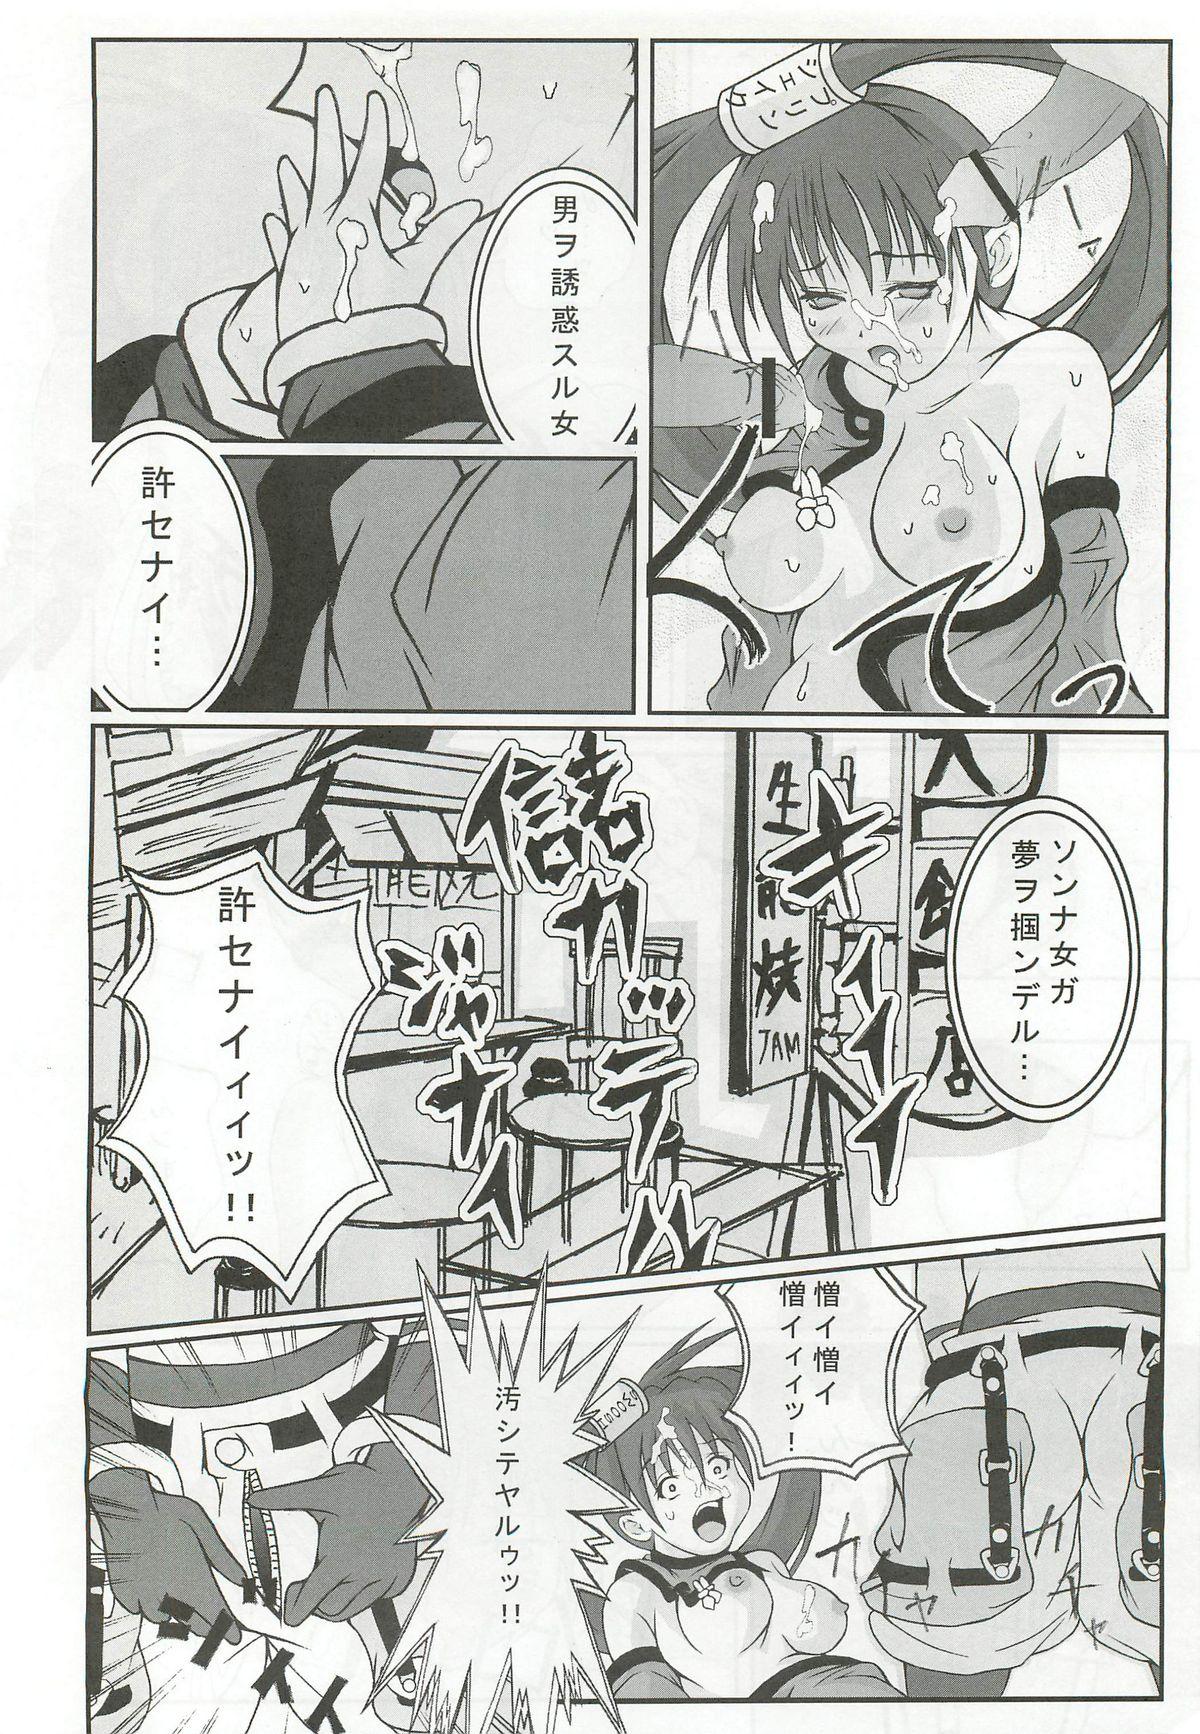 Rub Passionless 2 - Guilty gear Rimming - Page 7